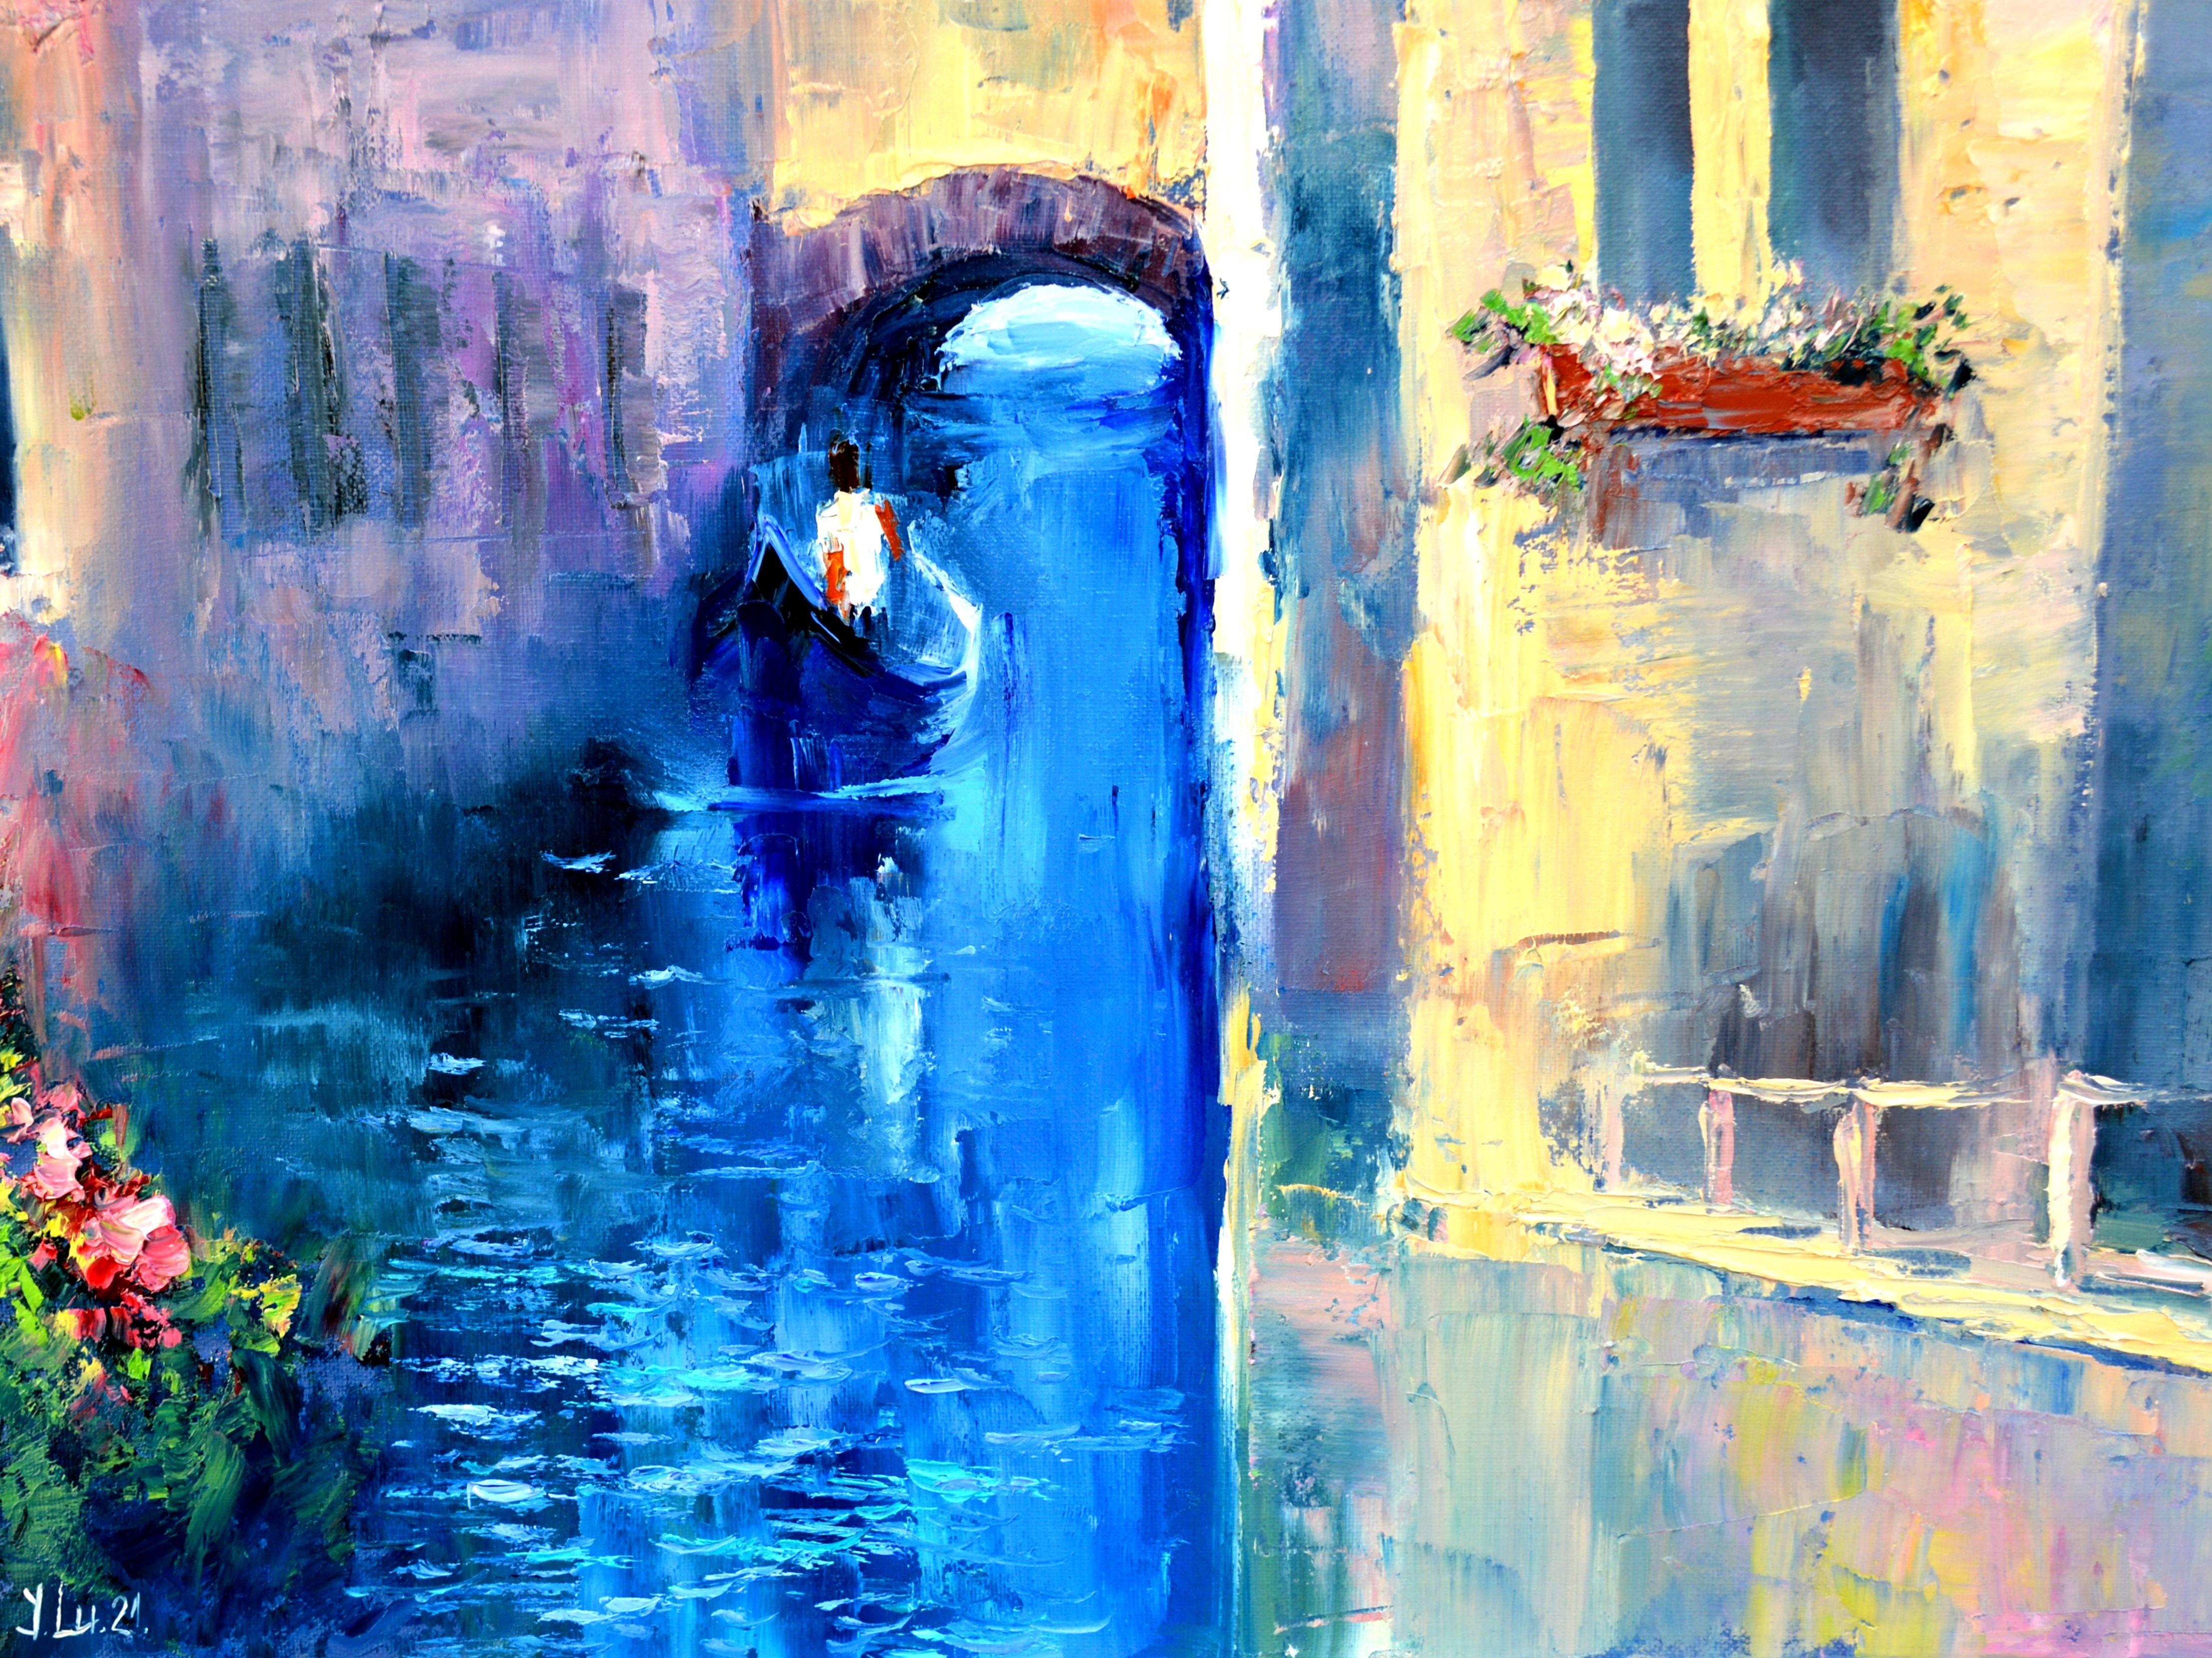 Imbued with my longing for the serene canals, this oil on canvas embodies my passion for the city's dance of light and shadow. Textured brushstrokes capture the fluidity of water and the warmth of sun-kissed walls, invoking the tranquil yet vibrant